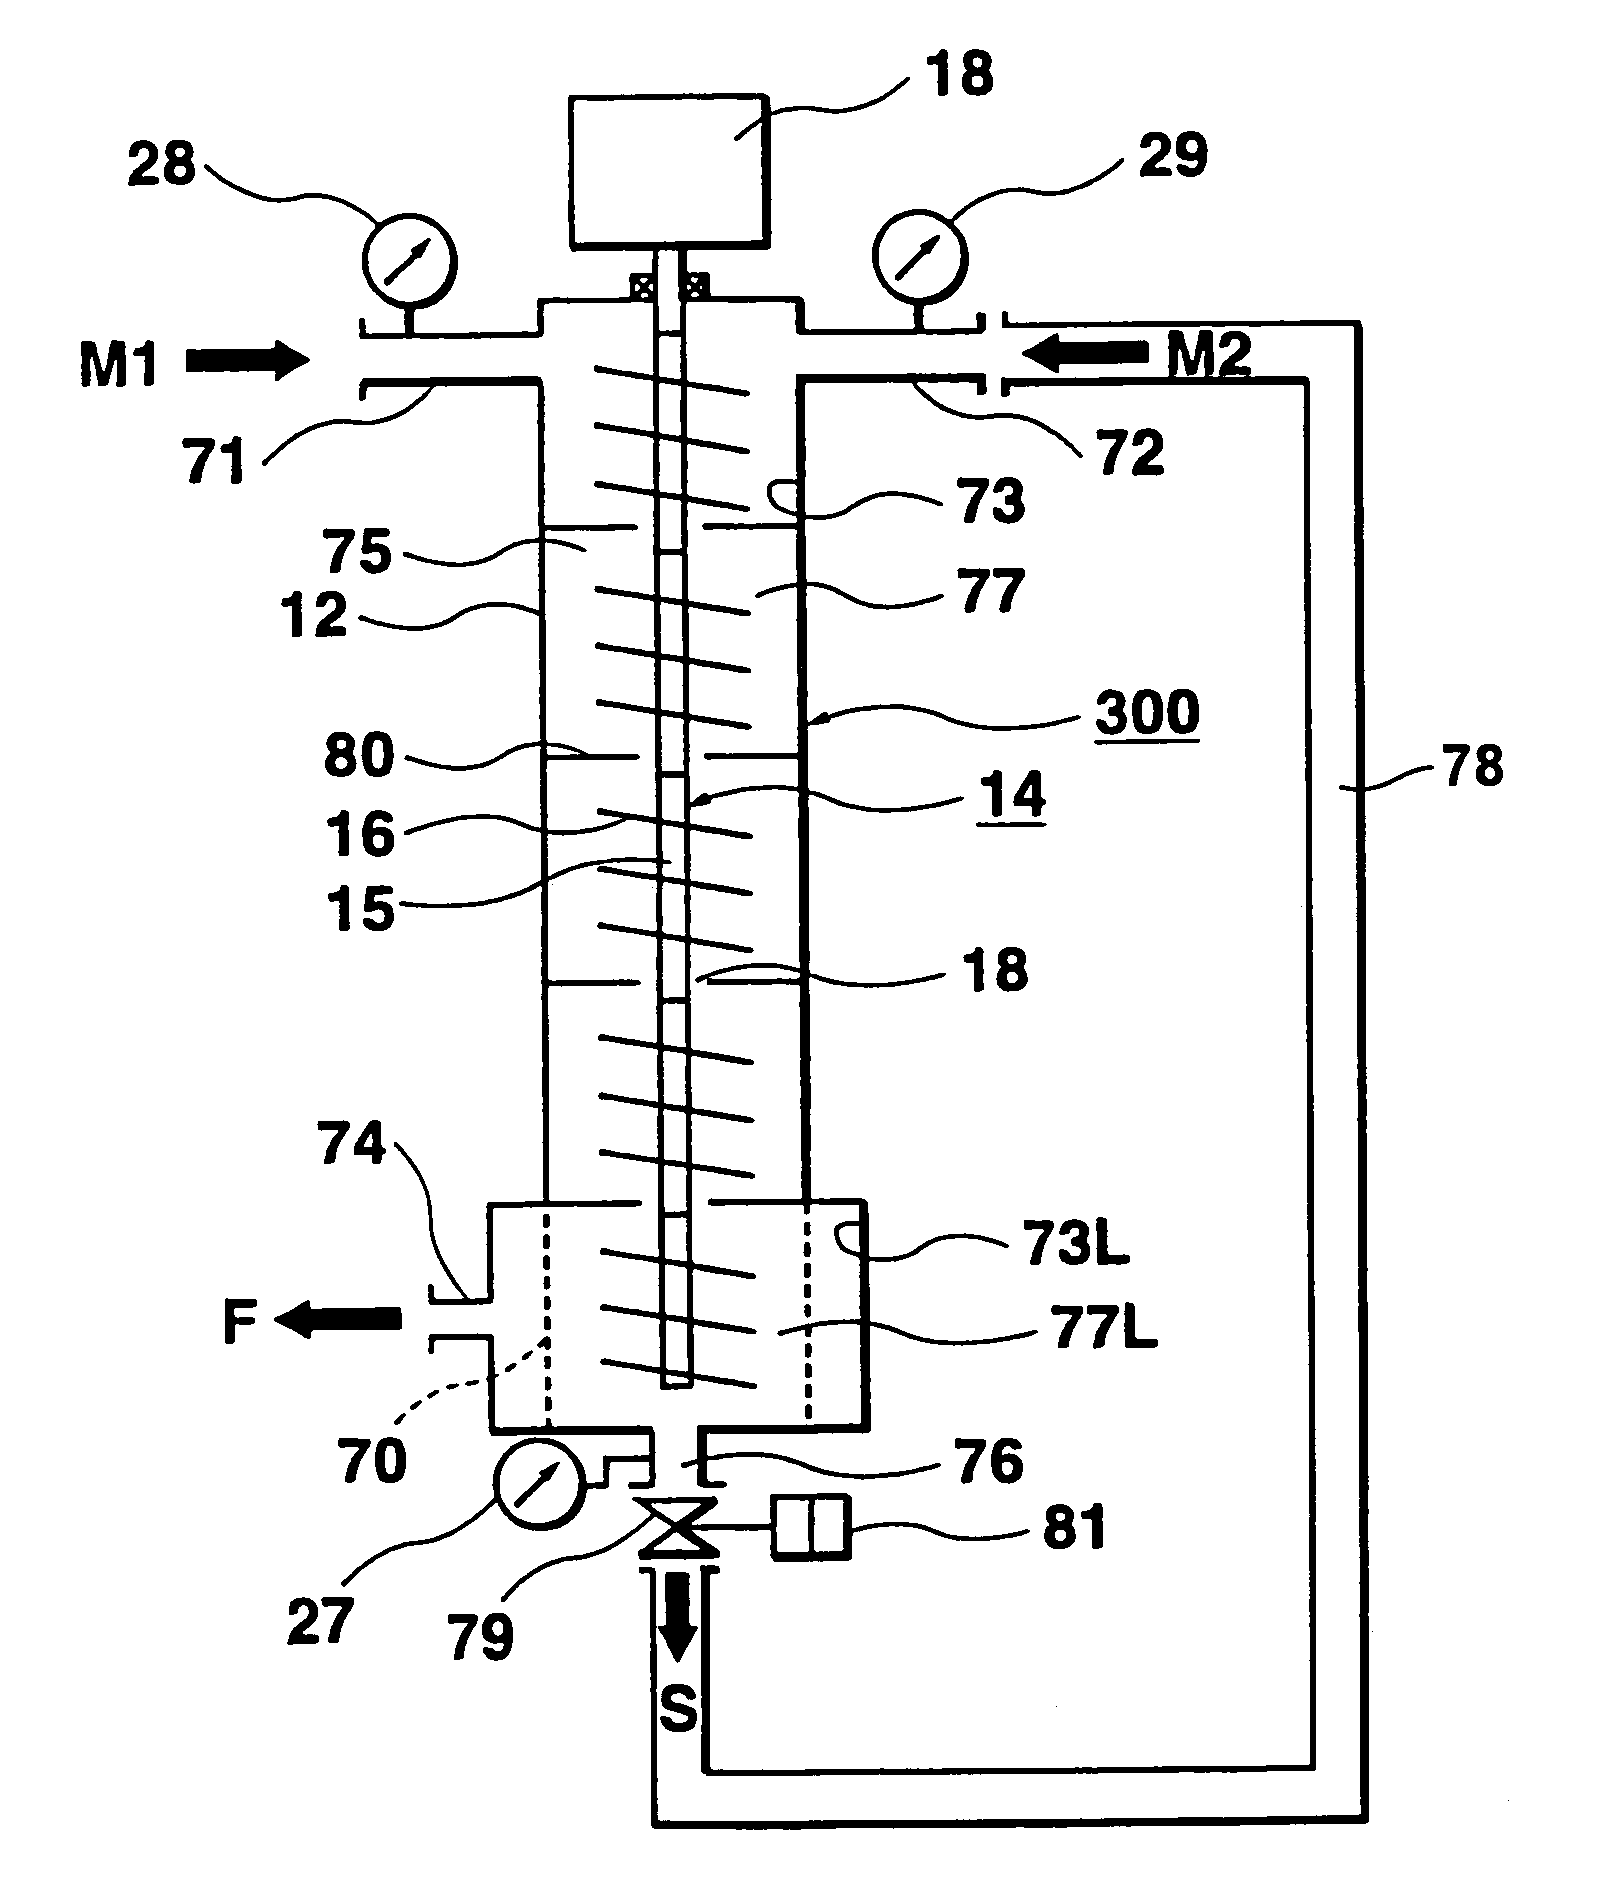 Apparatus and method for mixing by agitation in a multichambered mixing apparatus including a pre-agitation mixing chamber